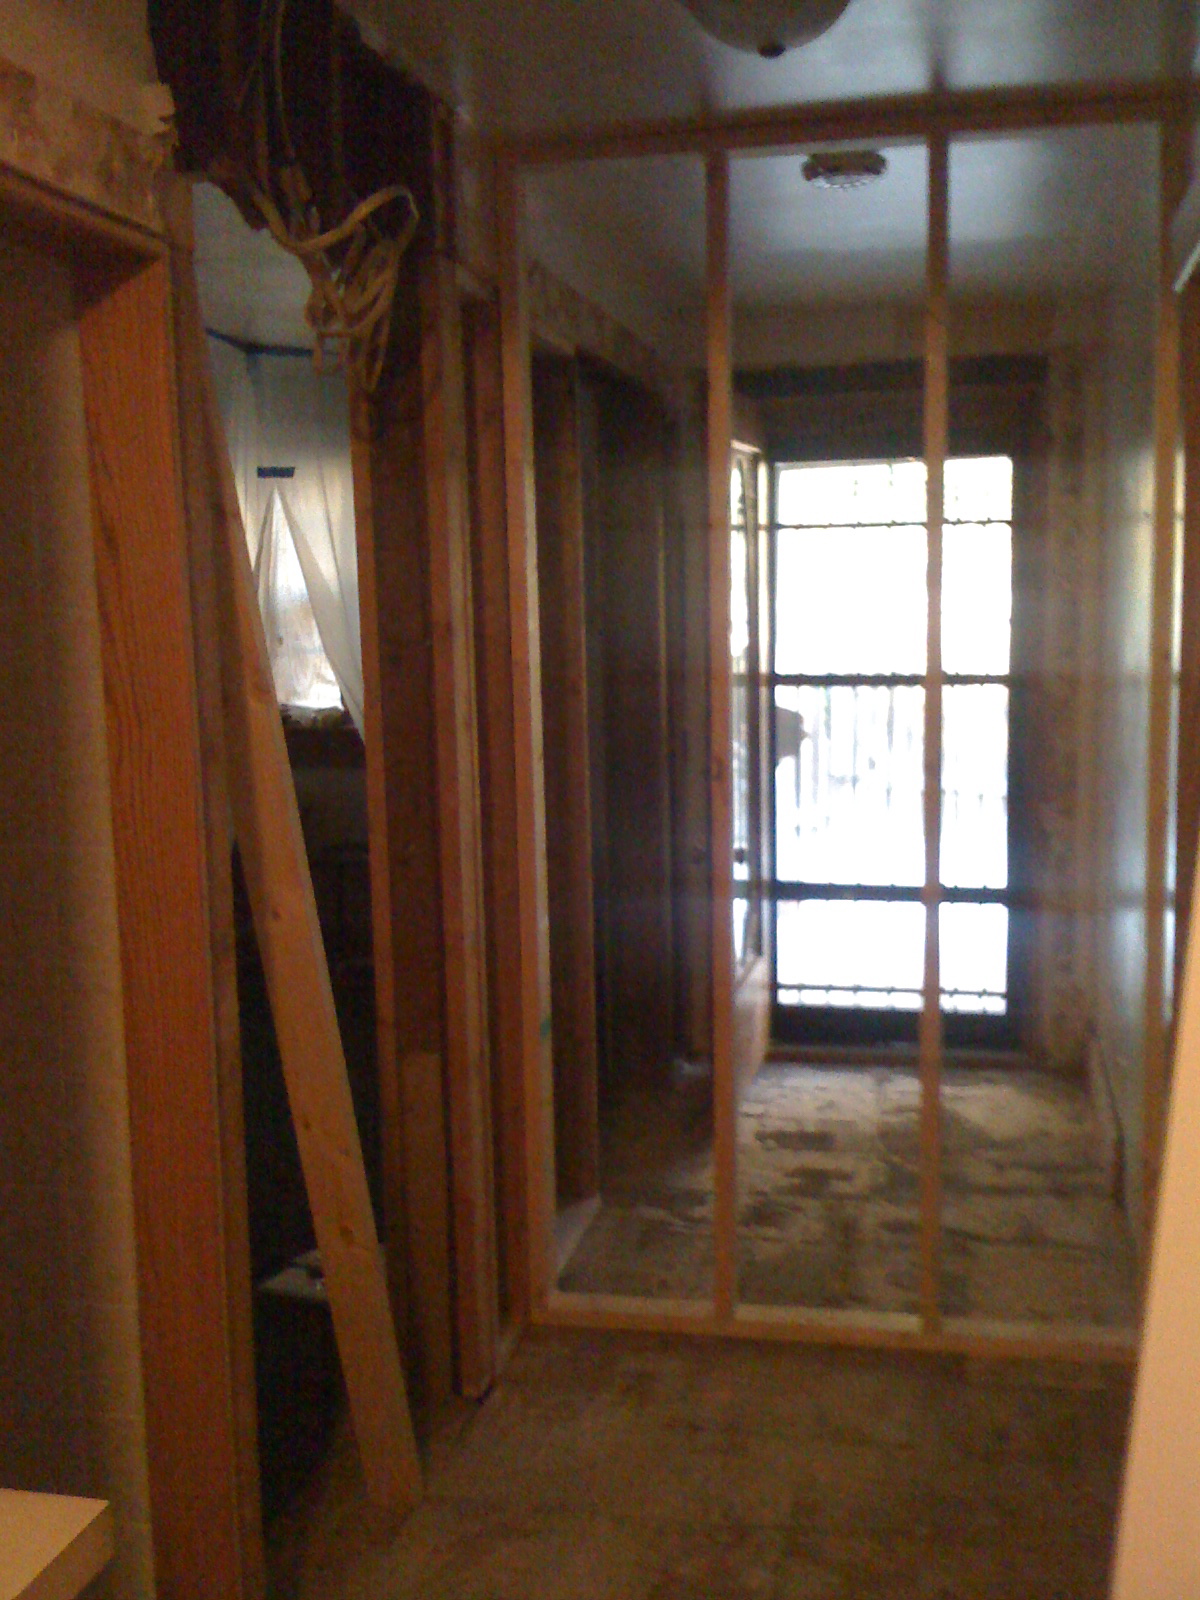 View from the hall. New closet framing and entry door to bedroom. Notice another door to the left (tiled wall), which was the original entrance to the bathroom, that we closed off.